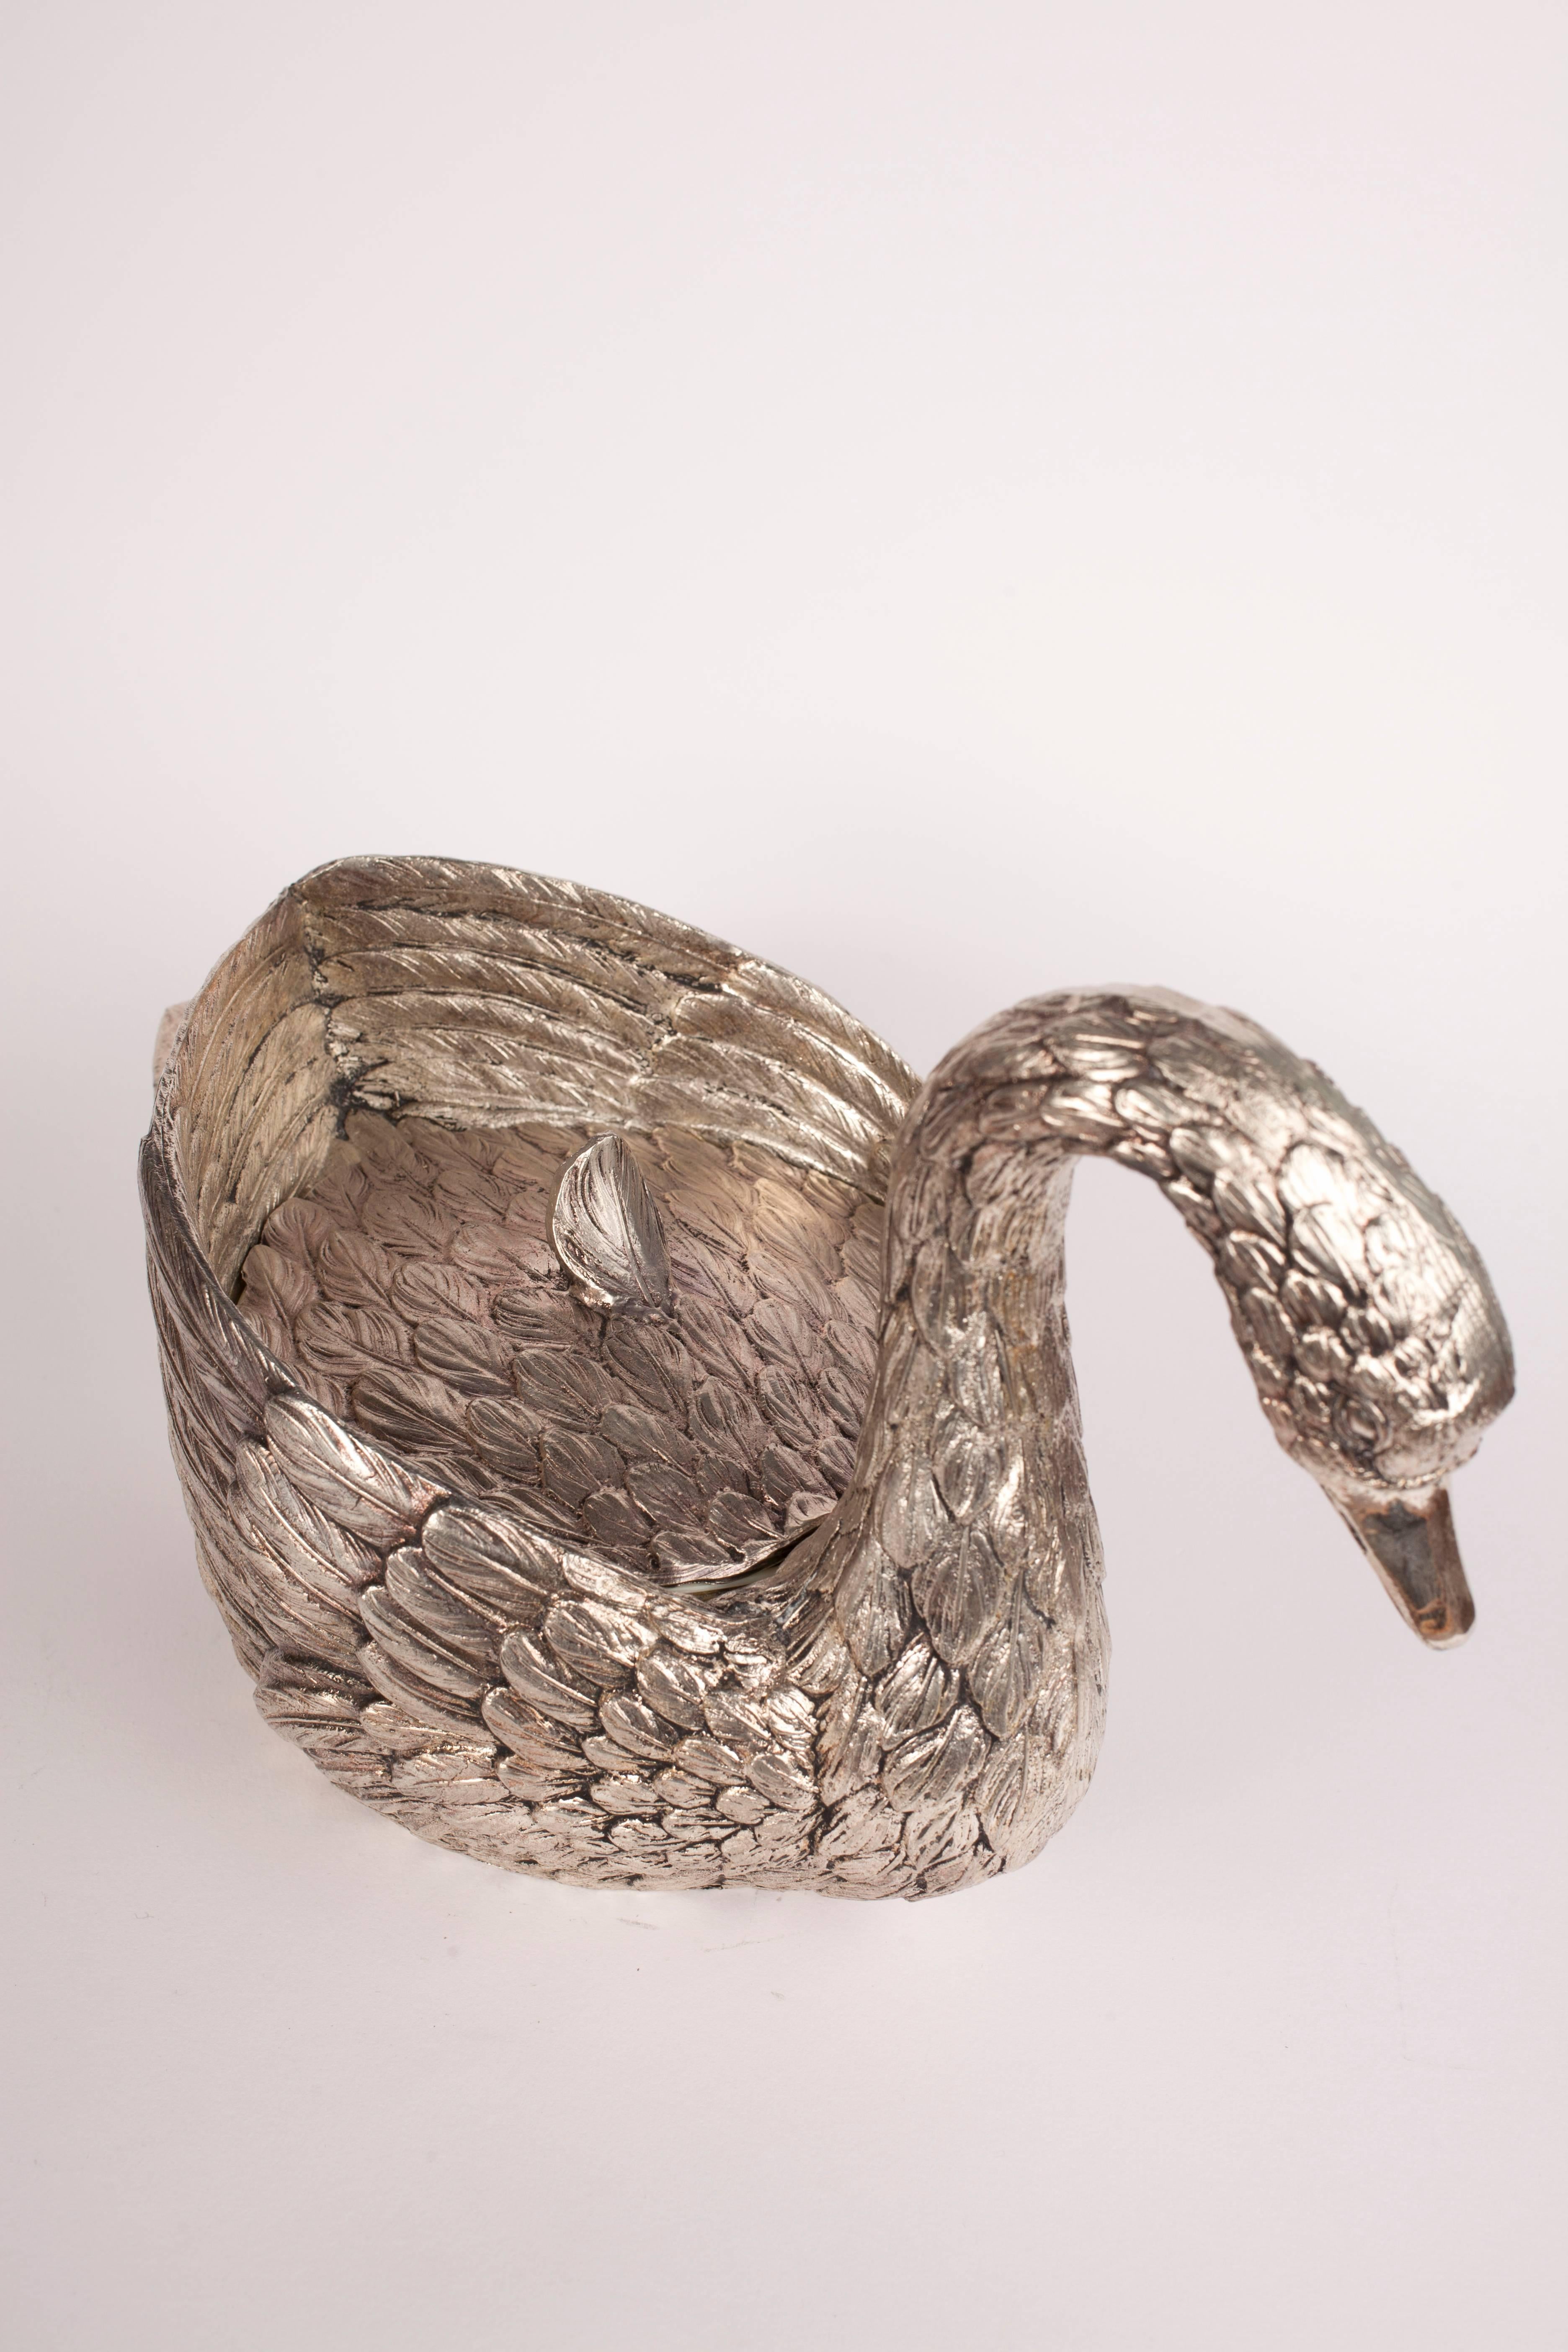 Gorgeous Swan Ice Bucket by Mauro Manetti In Excellent Condition For Sale In Brighton, East Sussex